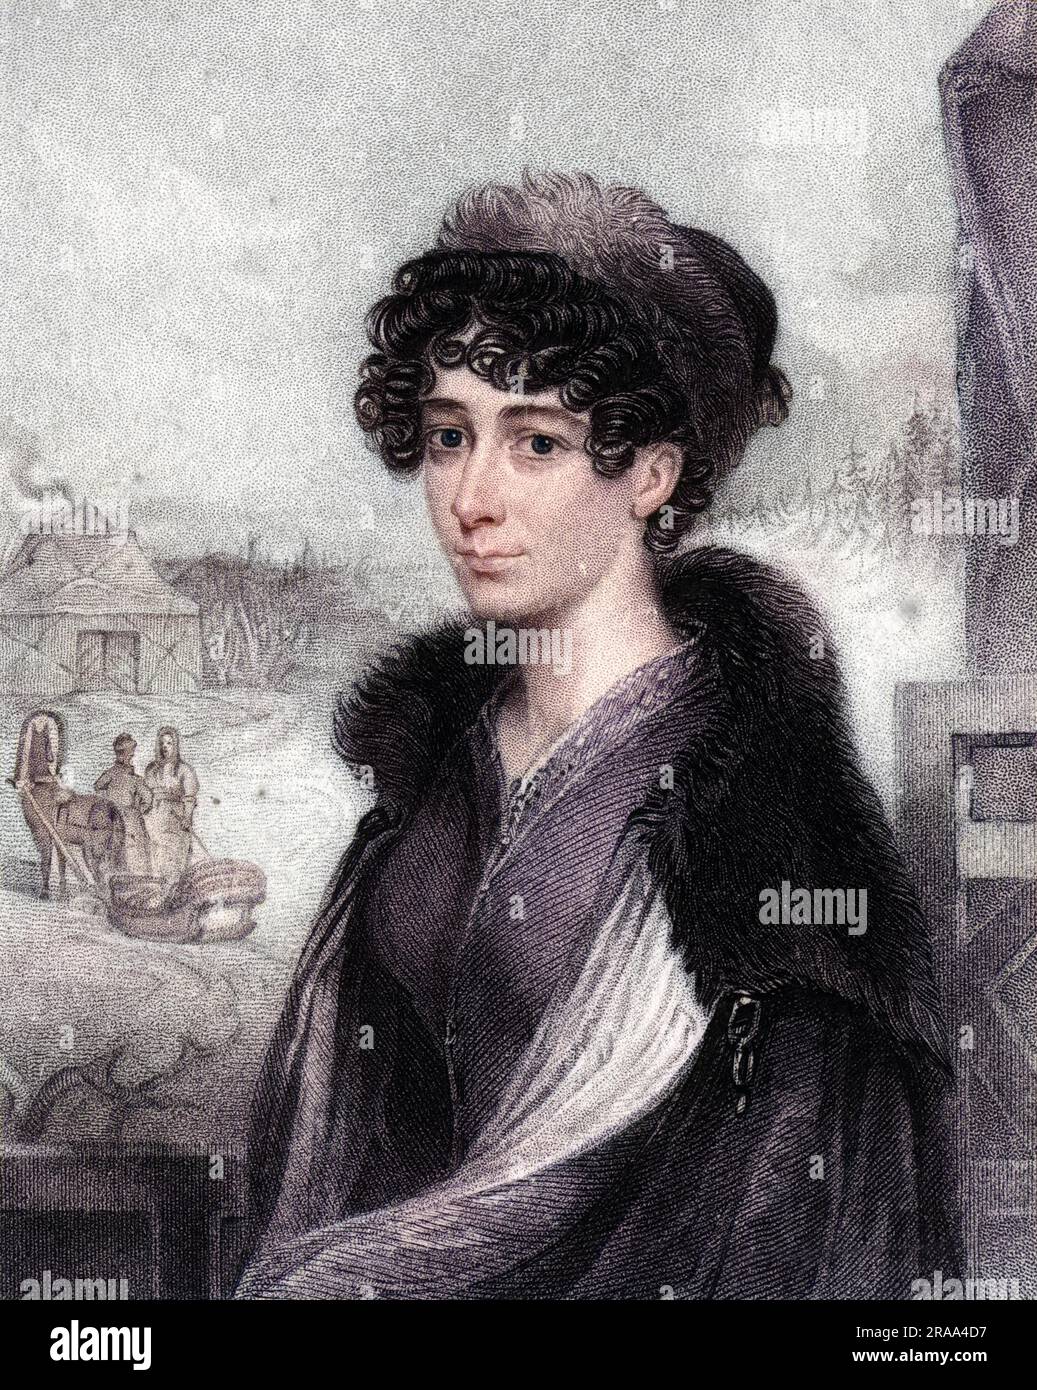 SARAH STALLYBRASS (nee Robinson) wife of Edward S., missionary in Mongolia, where she died.     Date: 1789 - 1833 Stock Photo